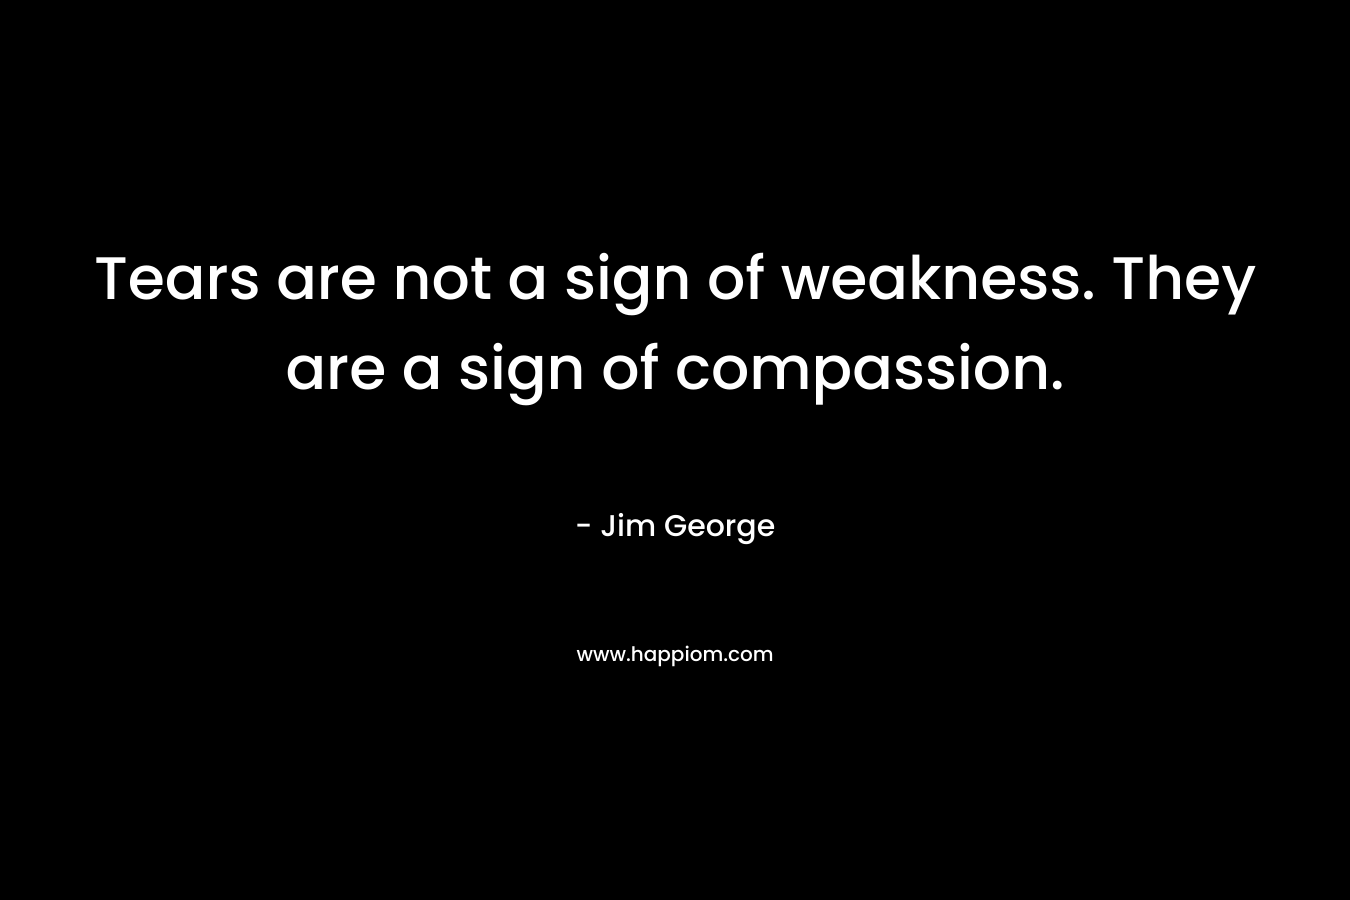 Tears are not a sign of weakness. They are a sign of compassion.